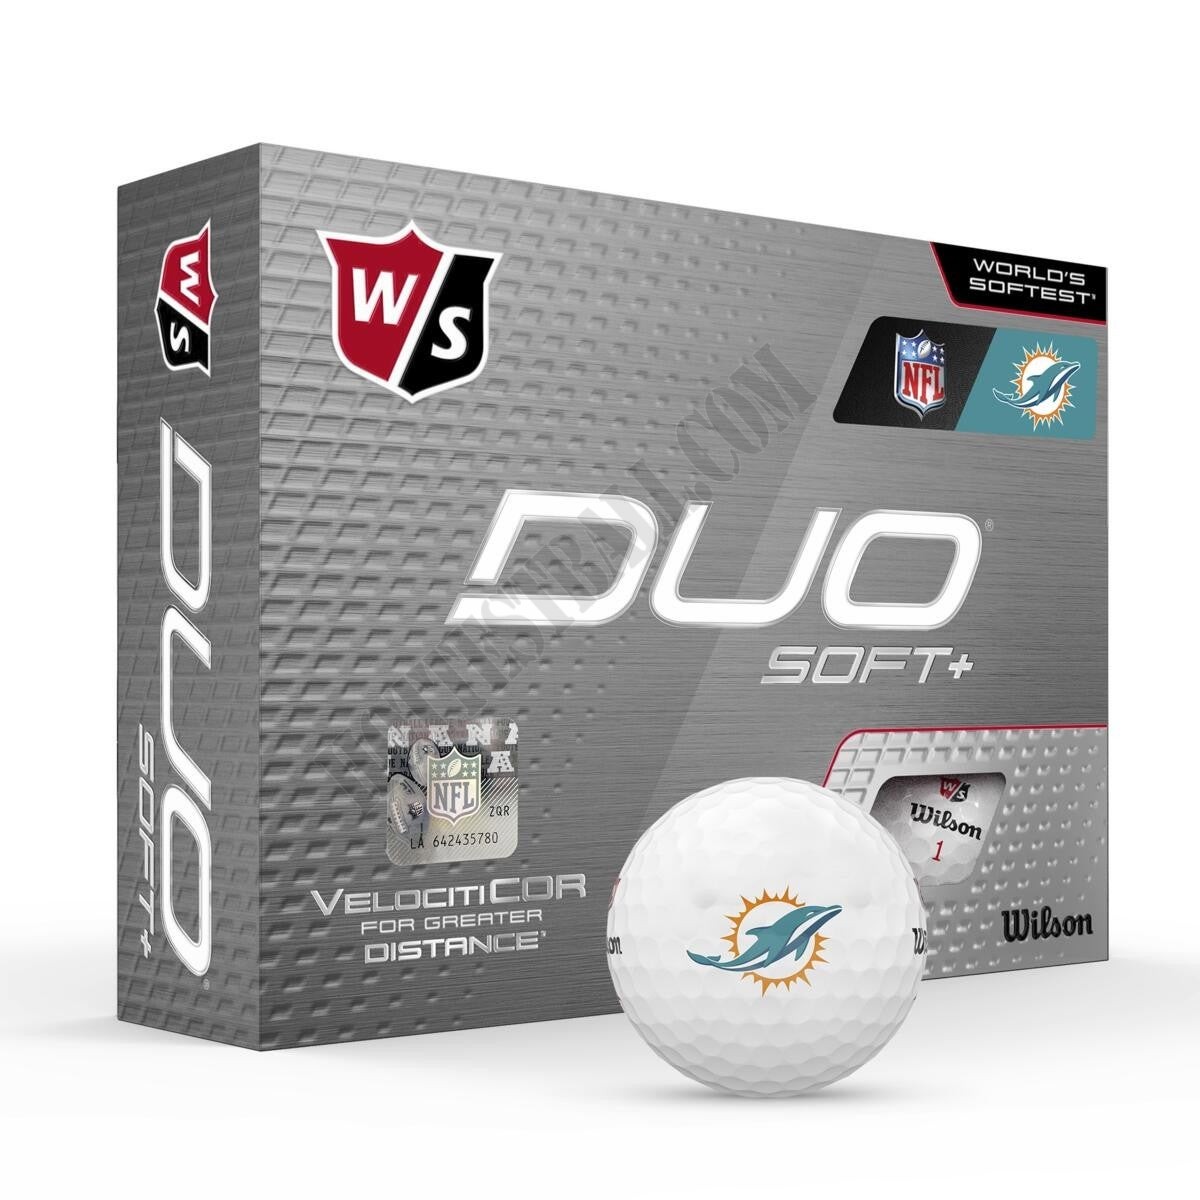 Duo Soft+ NFL Golf Balls - Miami Dolphins ● Wilson Promotions - -0